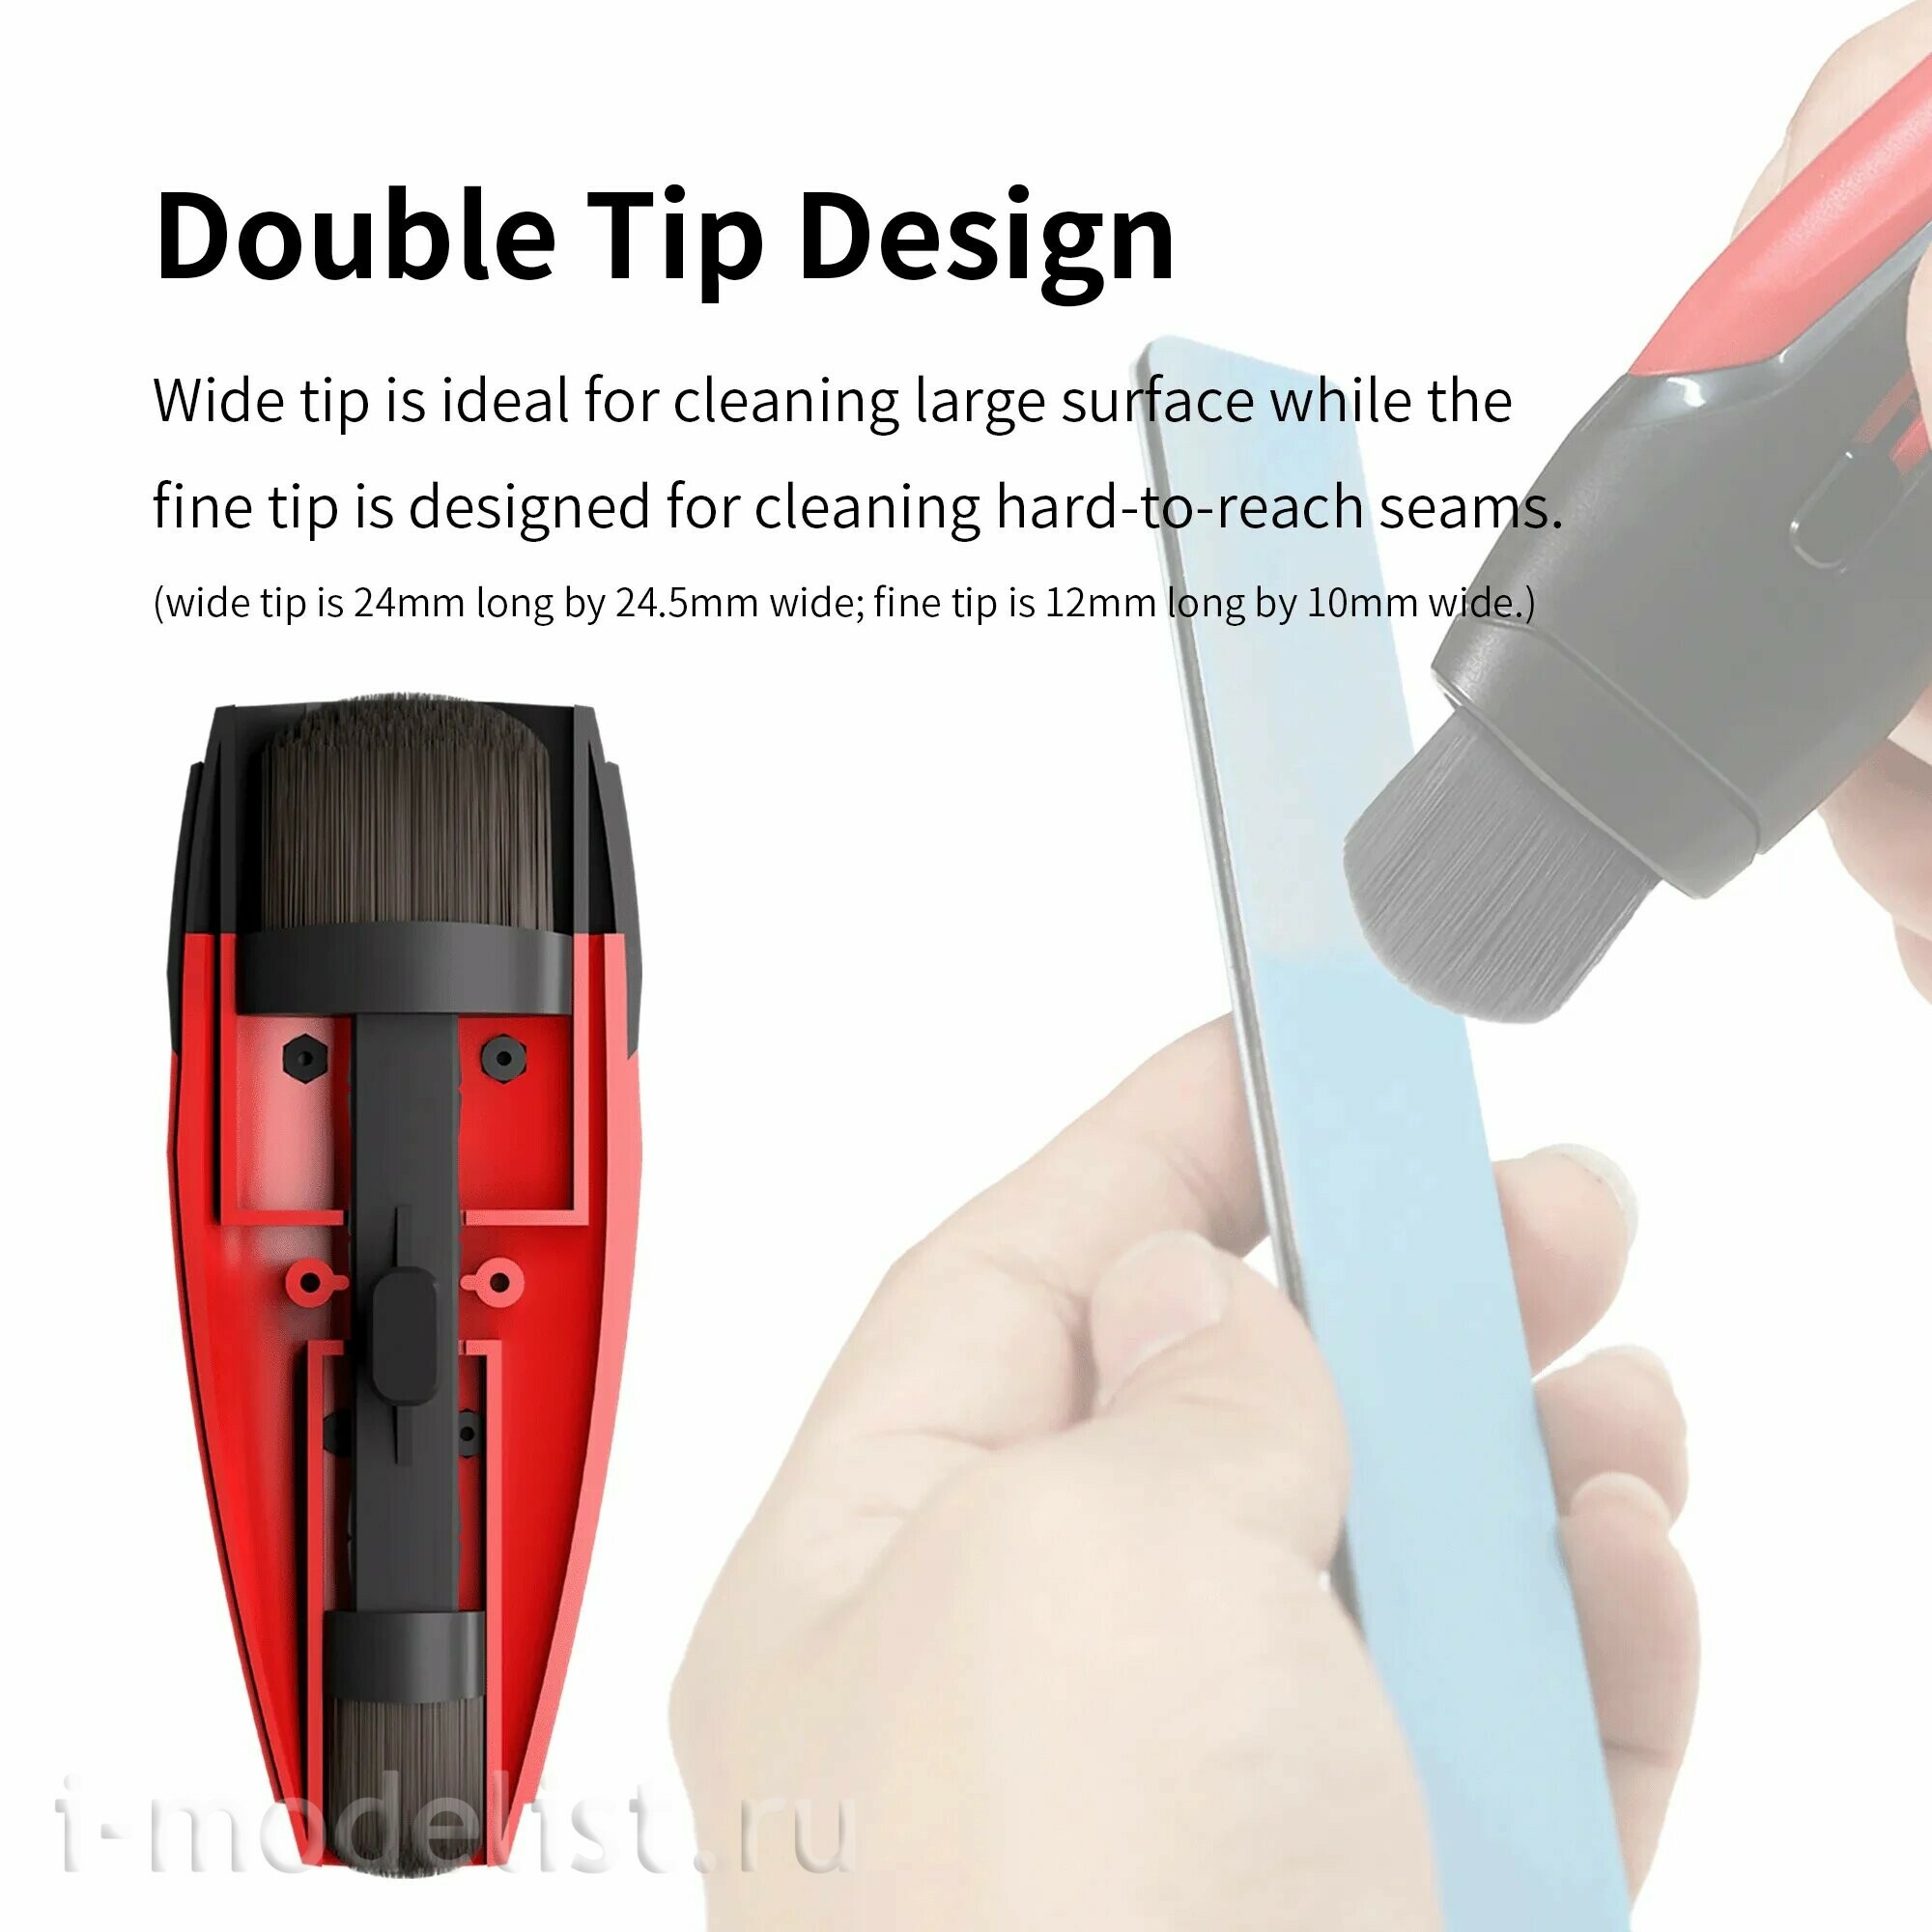 PT-RDB DSPIAE Retractable Dust Brush with Double Tip